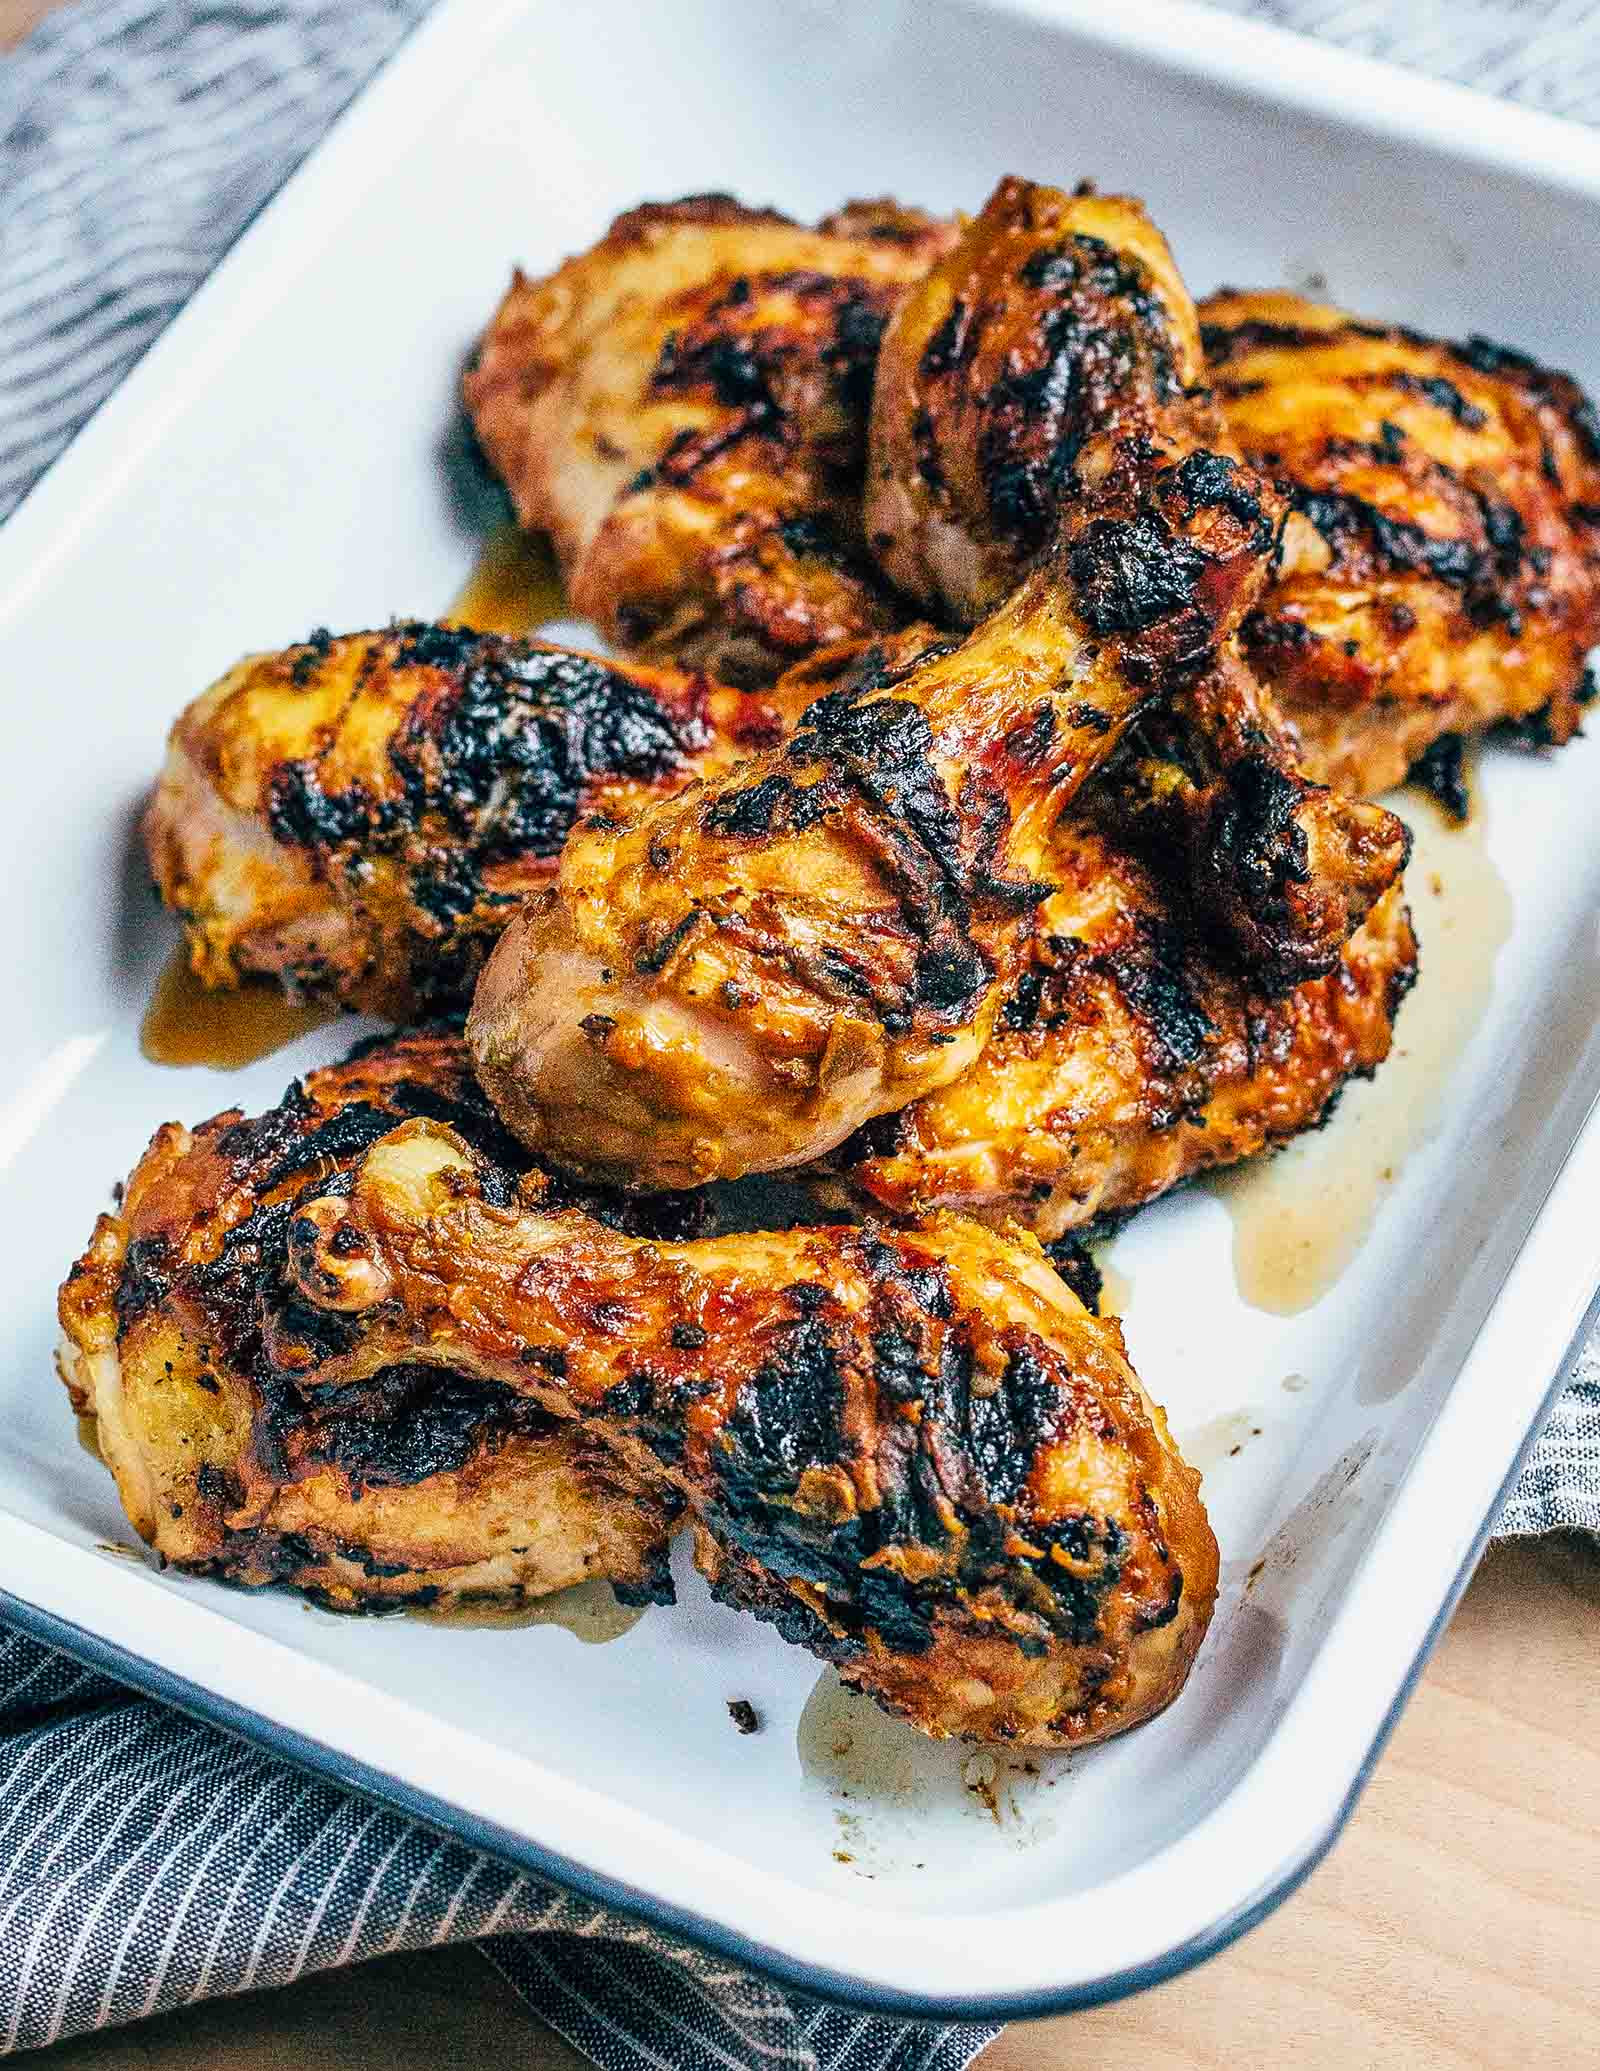 Grilled Bbq Chicken Recipe
 Grilled Chicken with South Carolina Style BBQ Sauce Recipe